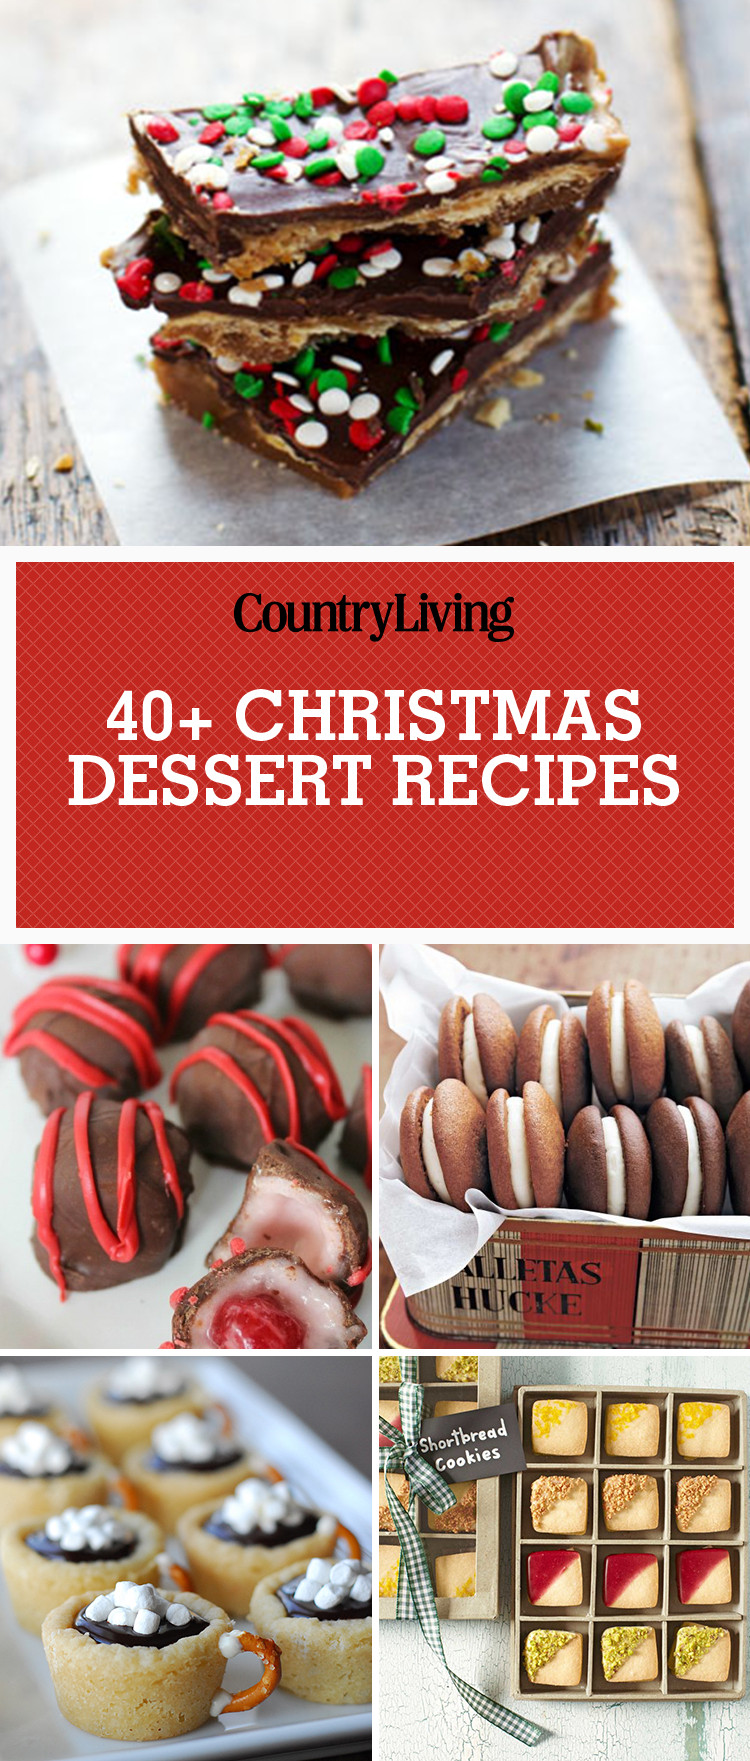 Easy Christmas Party Desserts
 45 Easy Christmas Desserts Best Recipes and Ideas for